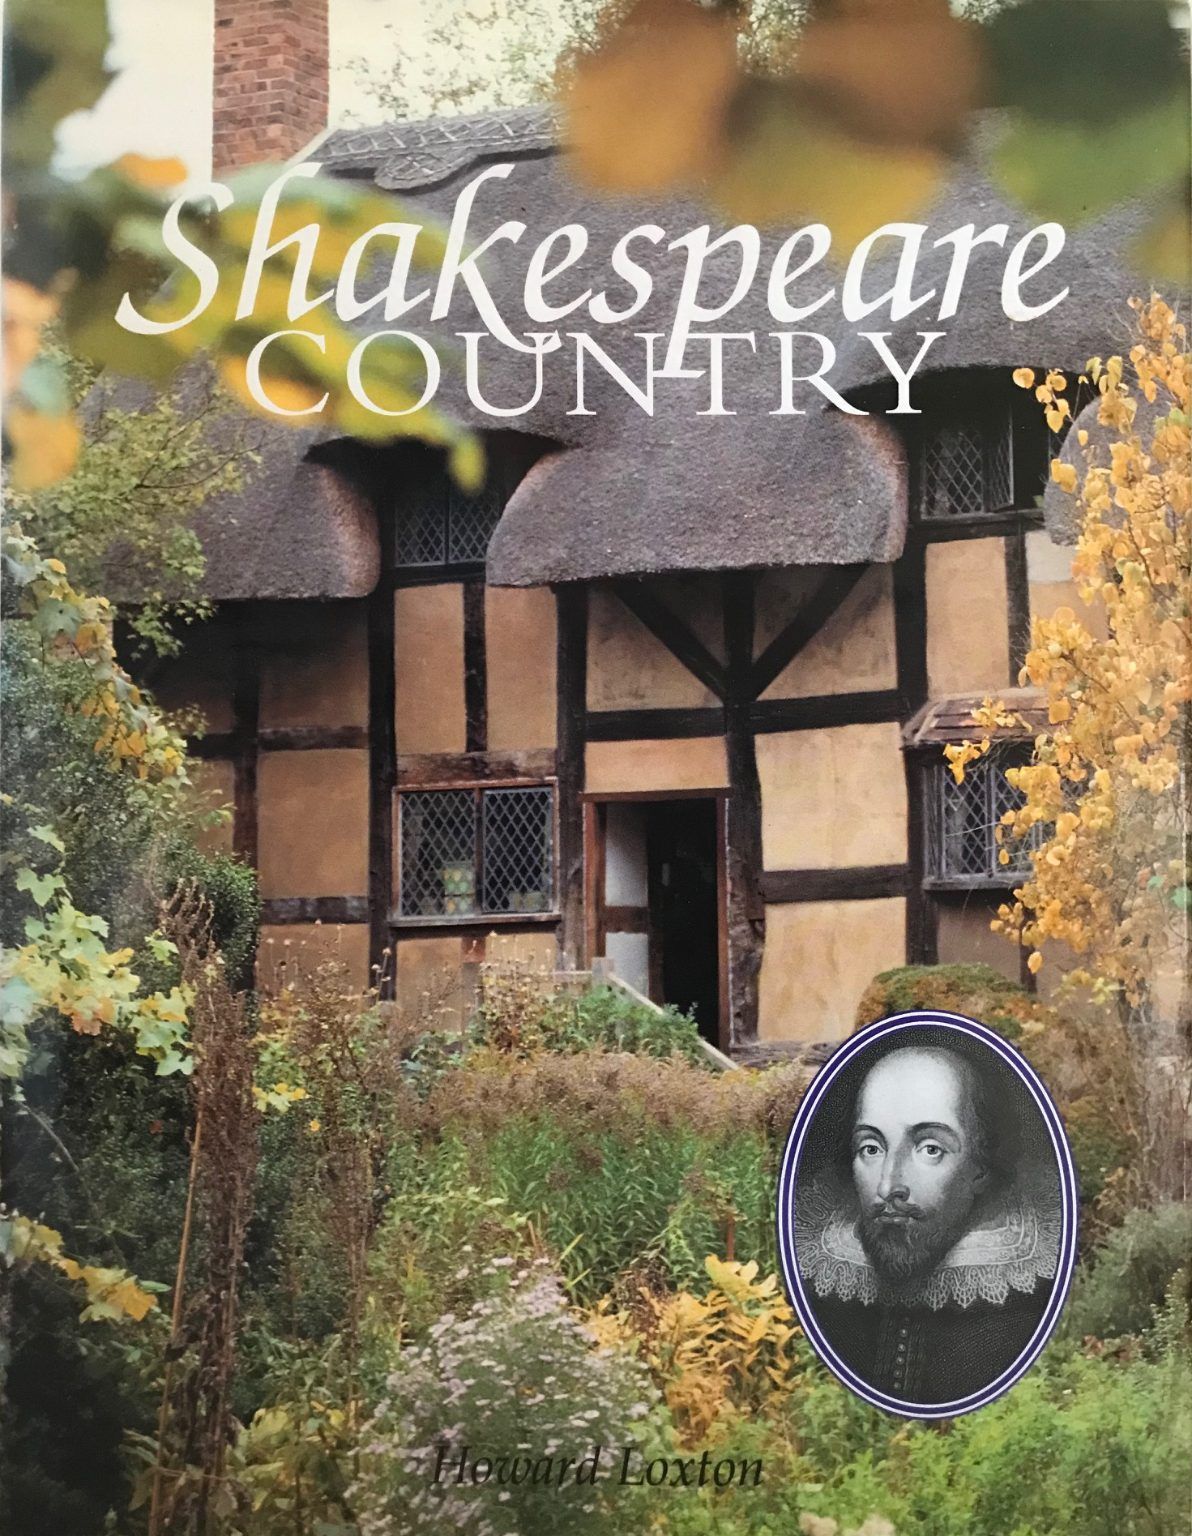 SHAKESPEARE COUNTRY